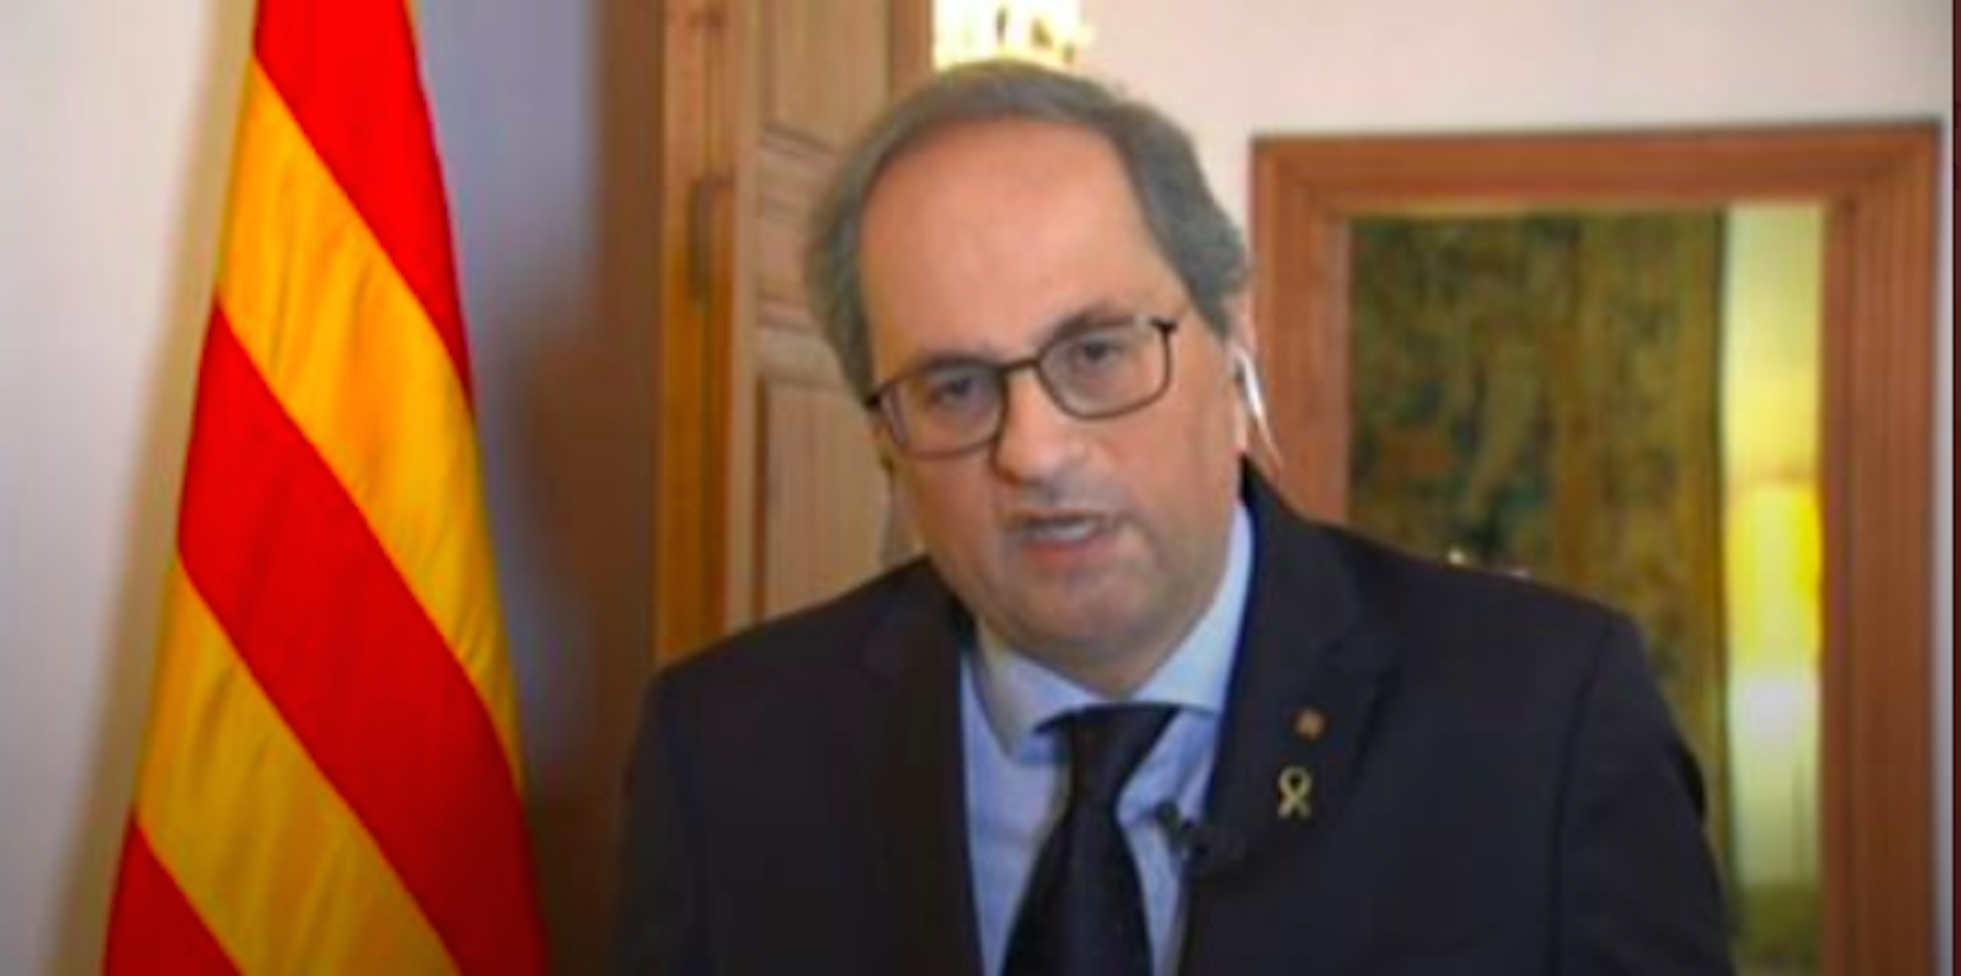 Le Monde: "Catalonia's fight is not only against coronavirus but also against the Spanish state"